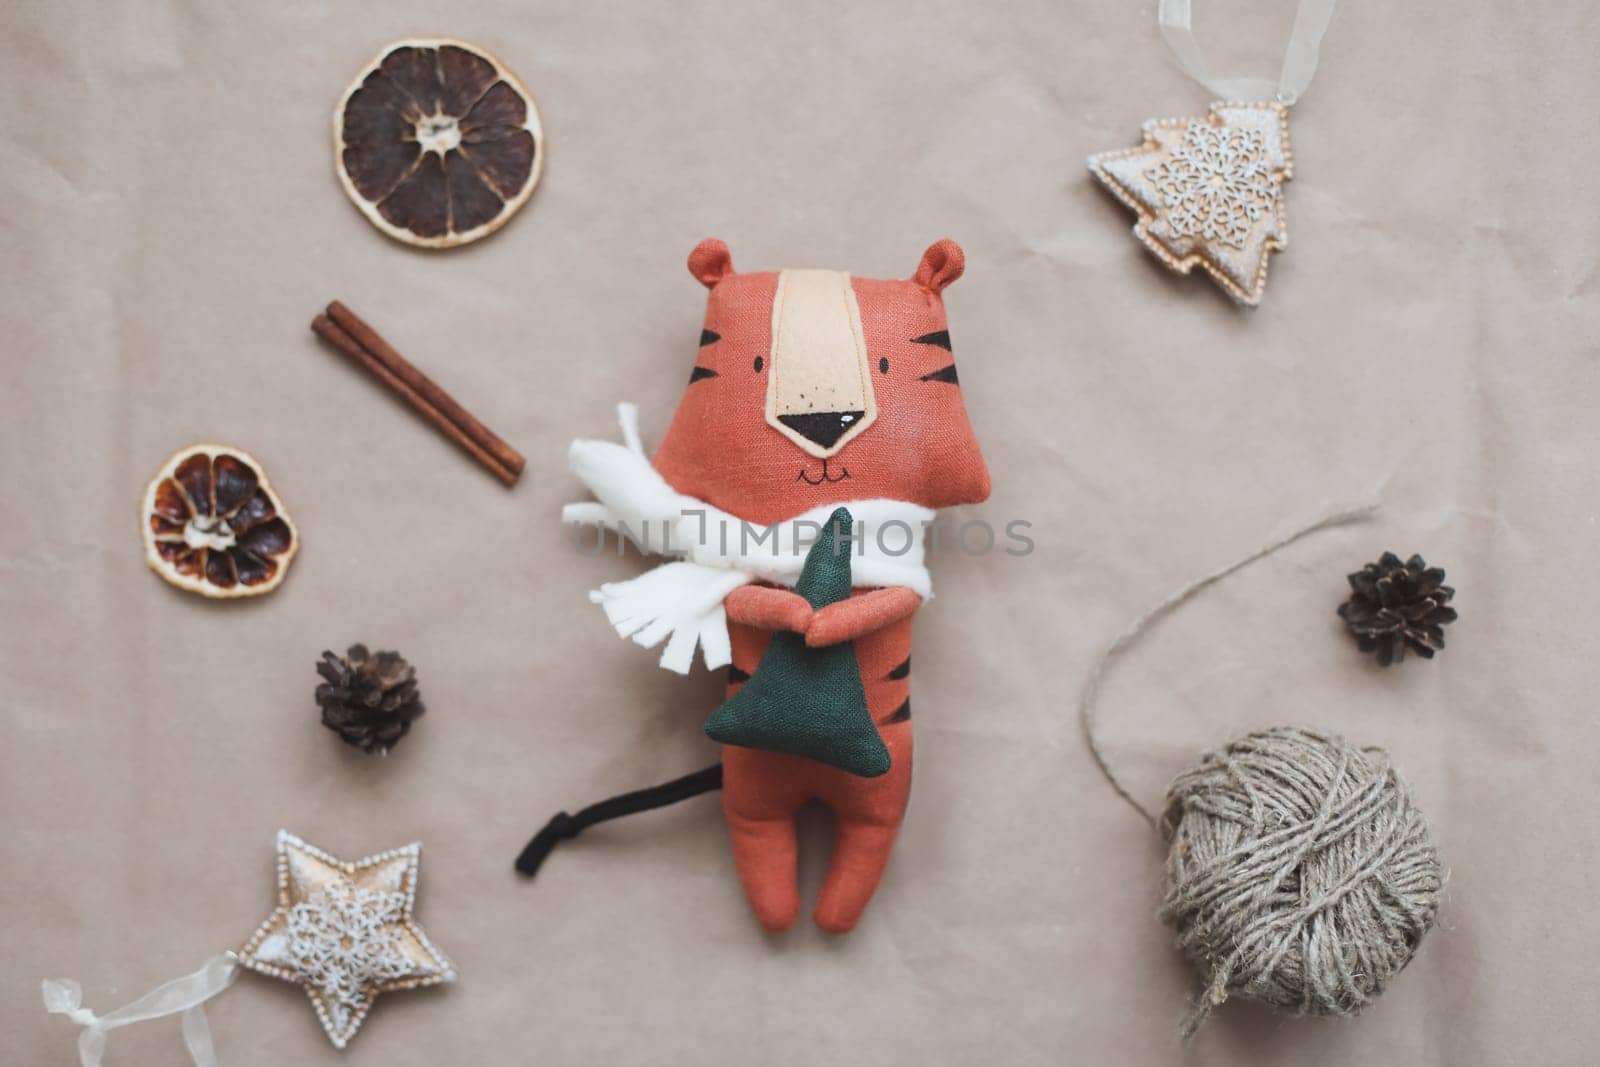 Christmas composition with a tiger toy, symbol of new 2022, a gift, fir tree branches and decorations. Christmas, winter, New year concept. Flat lay, top view.